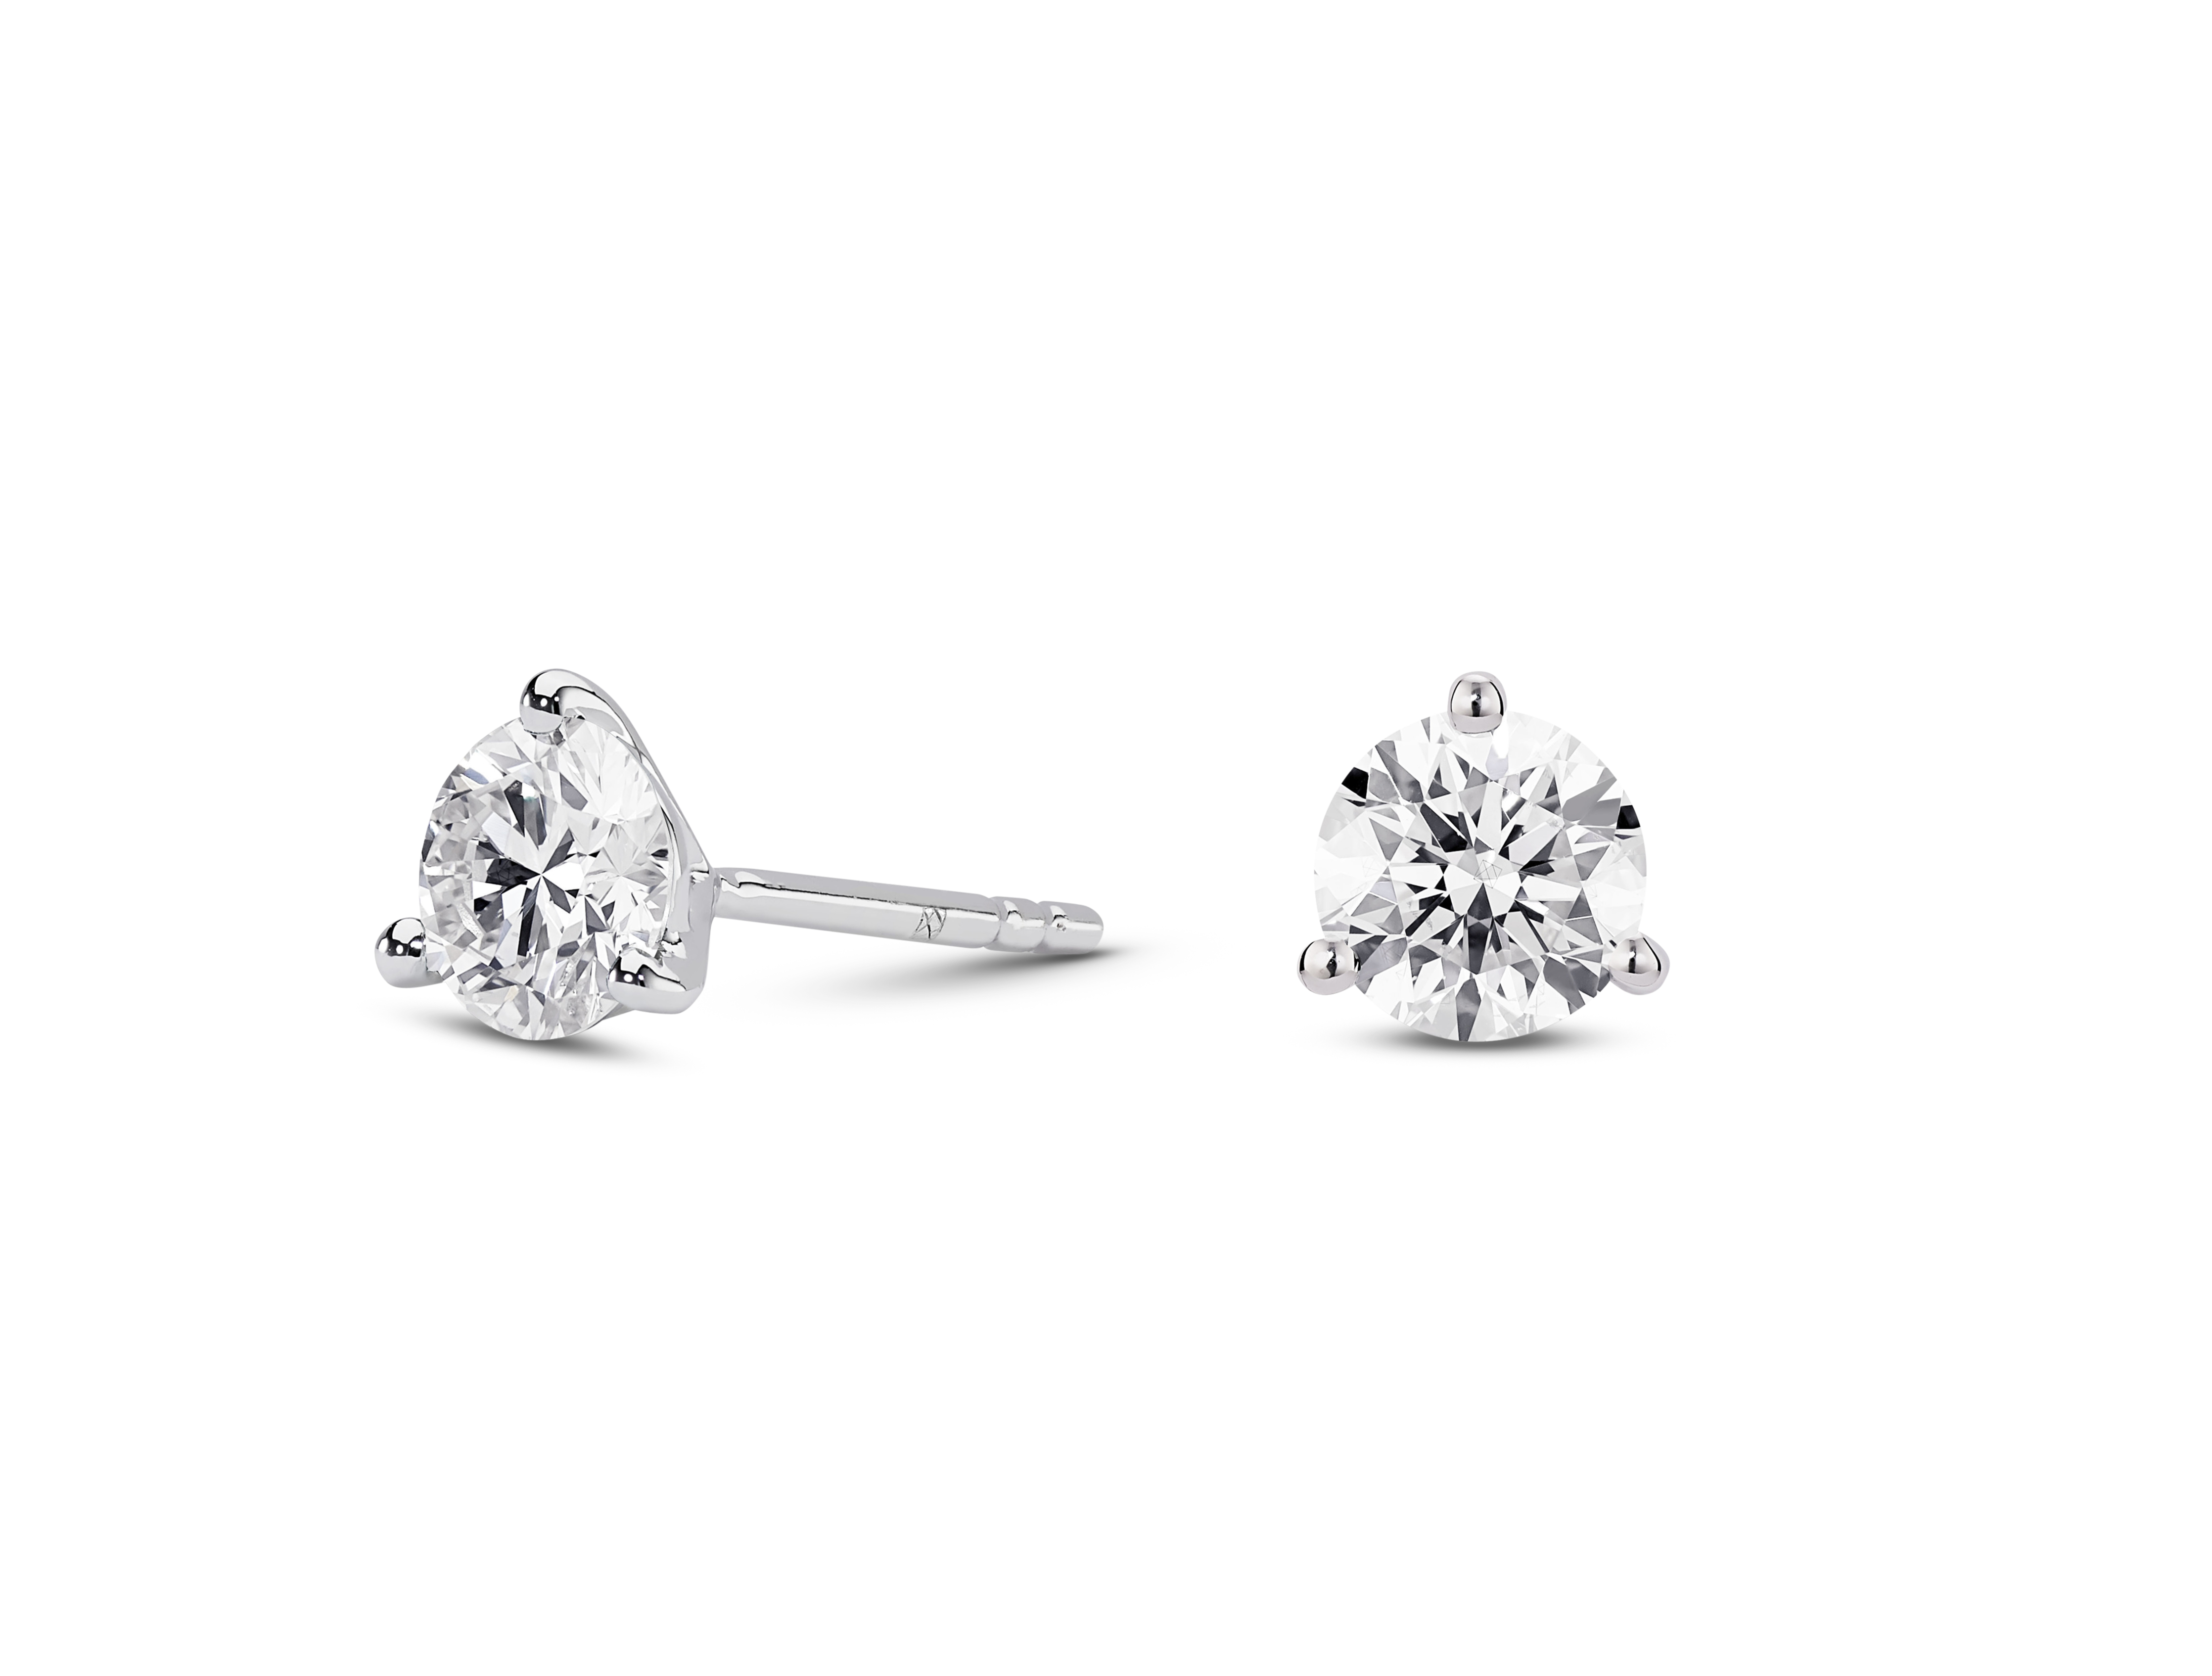 10k Gold 1ct. Solitaire Studs | Lightbox Jewelry